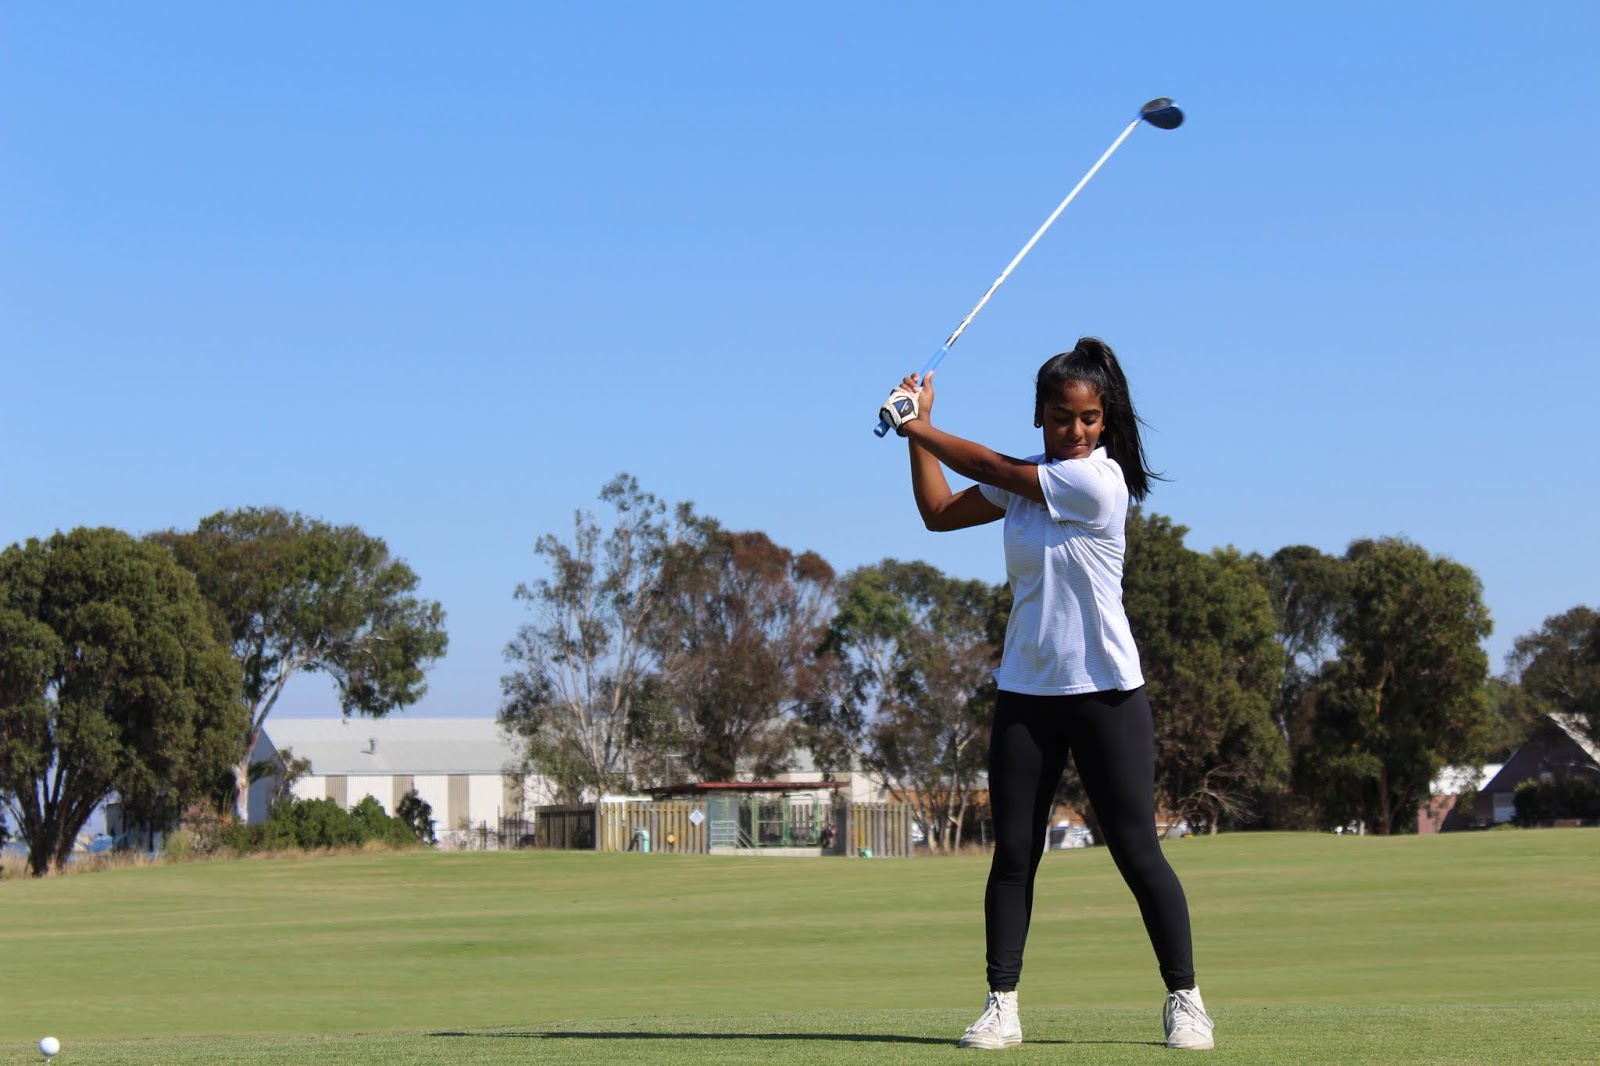 Quick Tips To Improve Your Golf Game